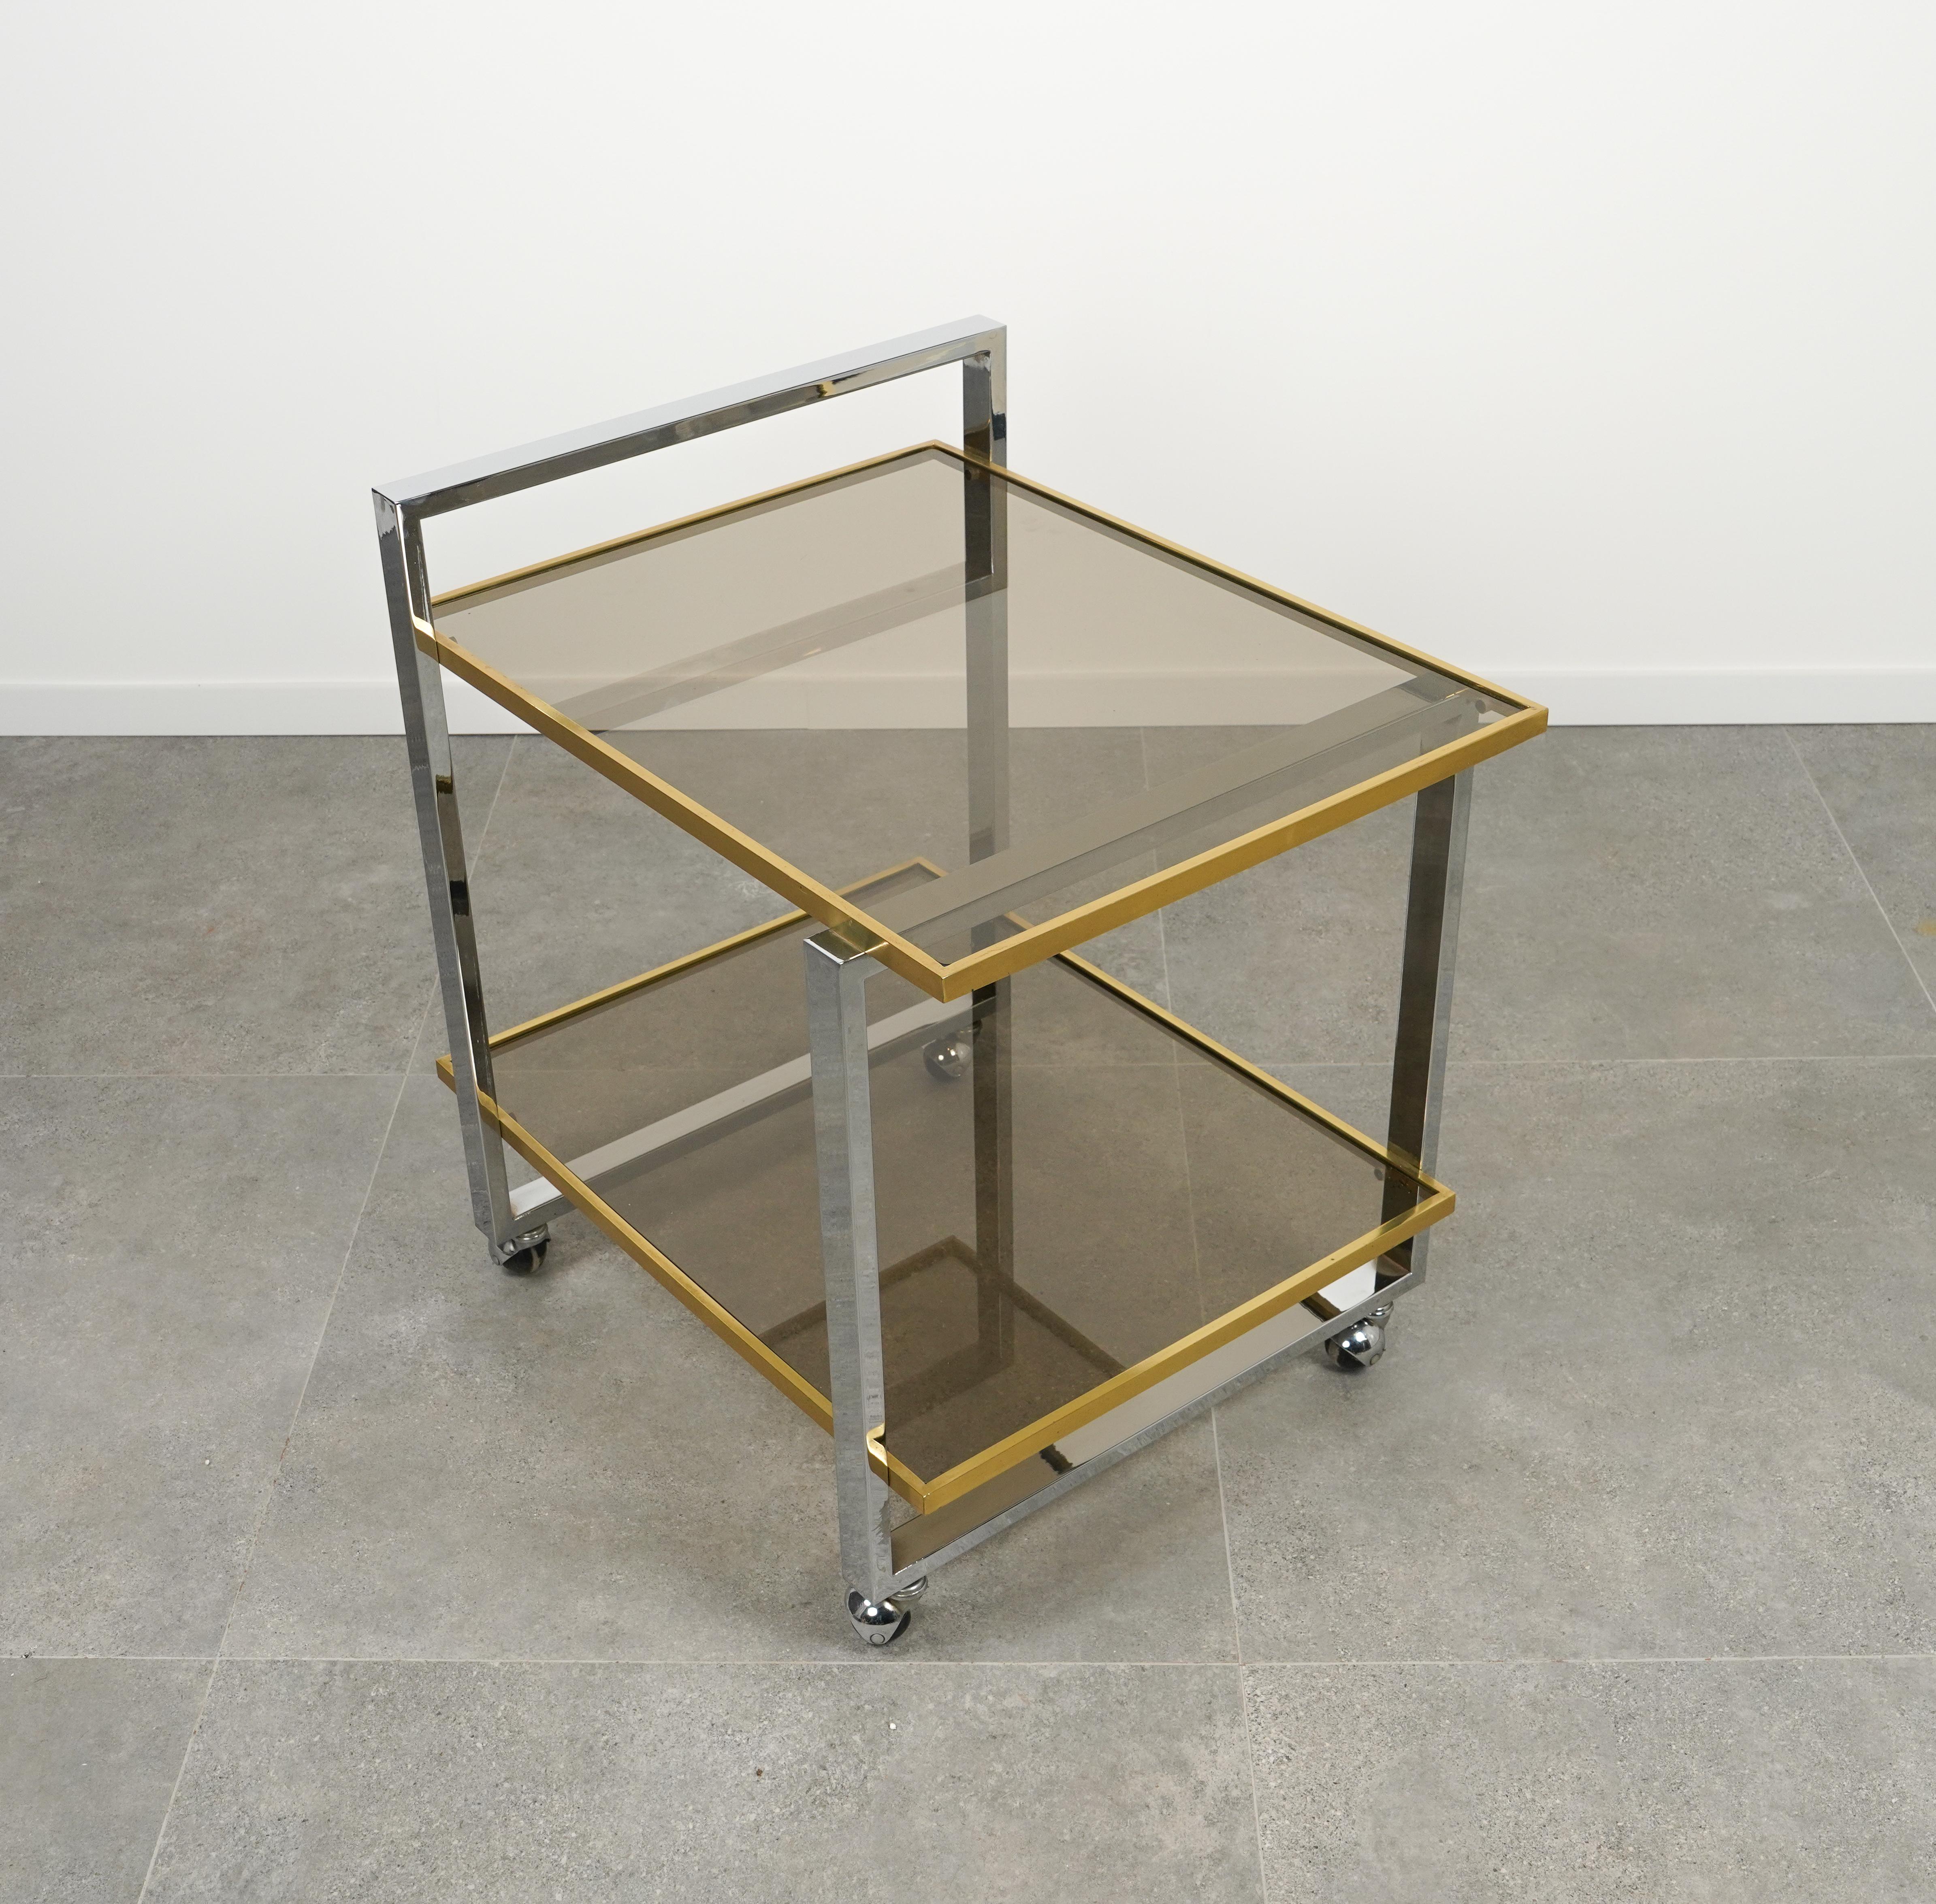 Midcentury beautiful serving bar cart / trolley in chrome, brass and two smoked glass shelve smoked glass attributed to Romeo Rega.

Made in Italy in the 1970s.